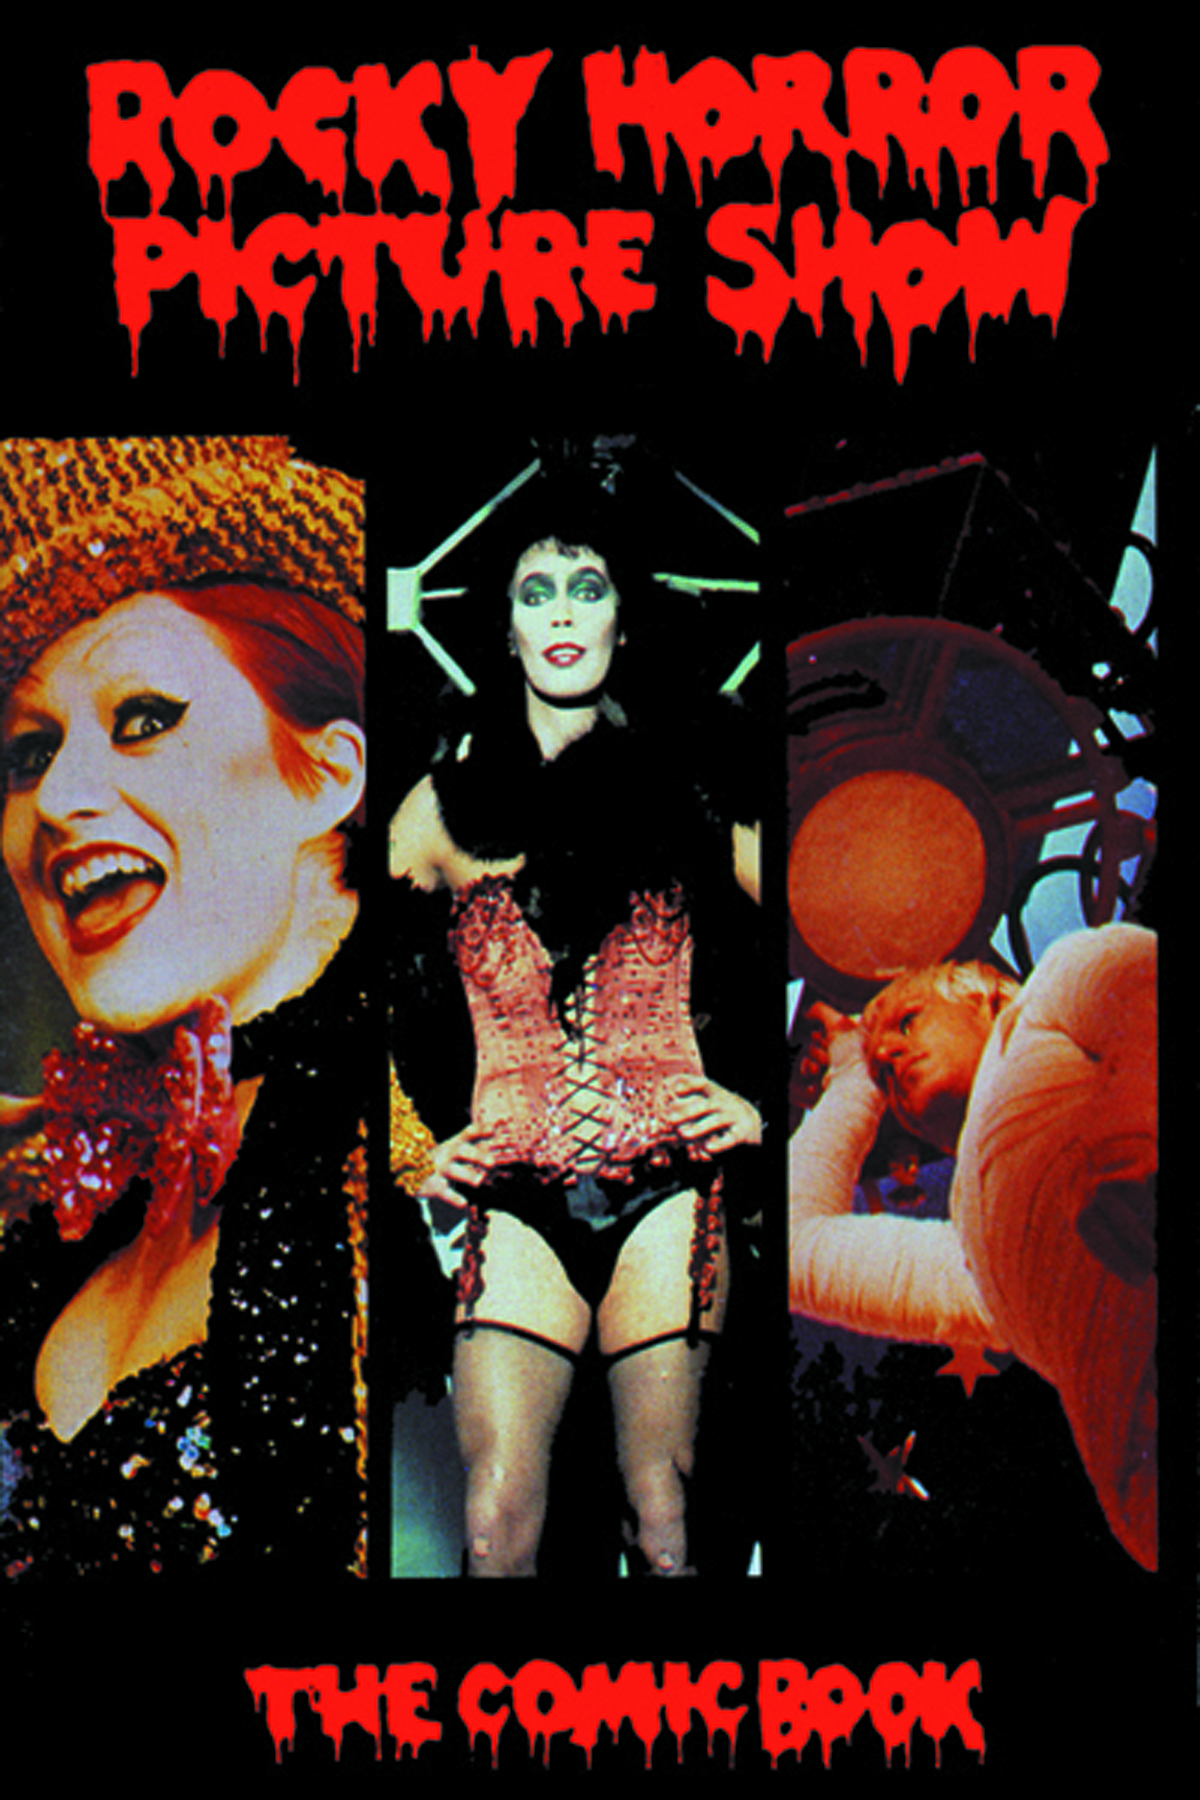 ROCKY HORROR PICTURE SHOW TP REVISED ED